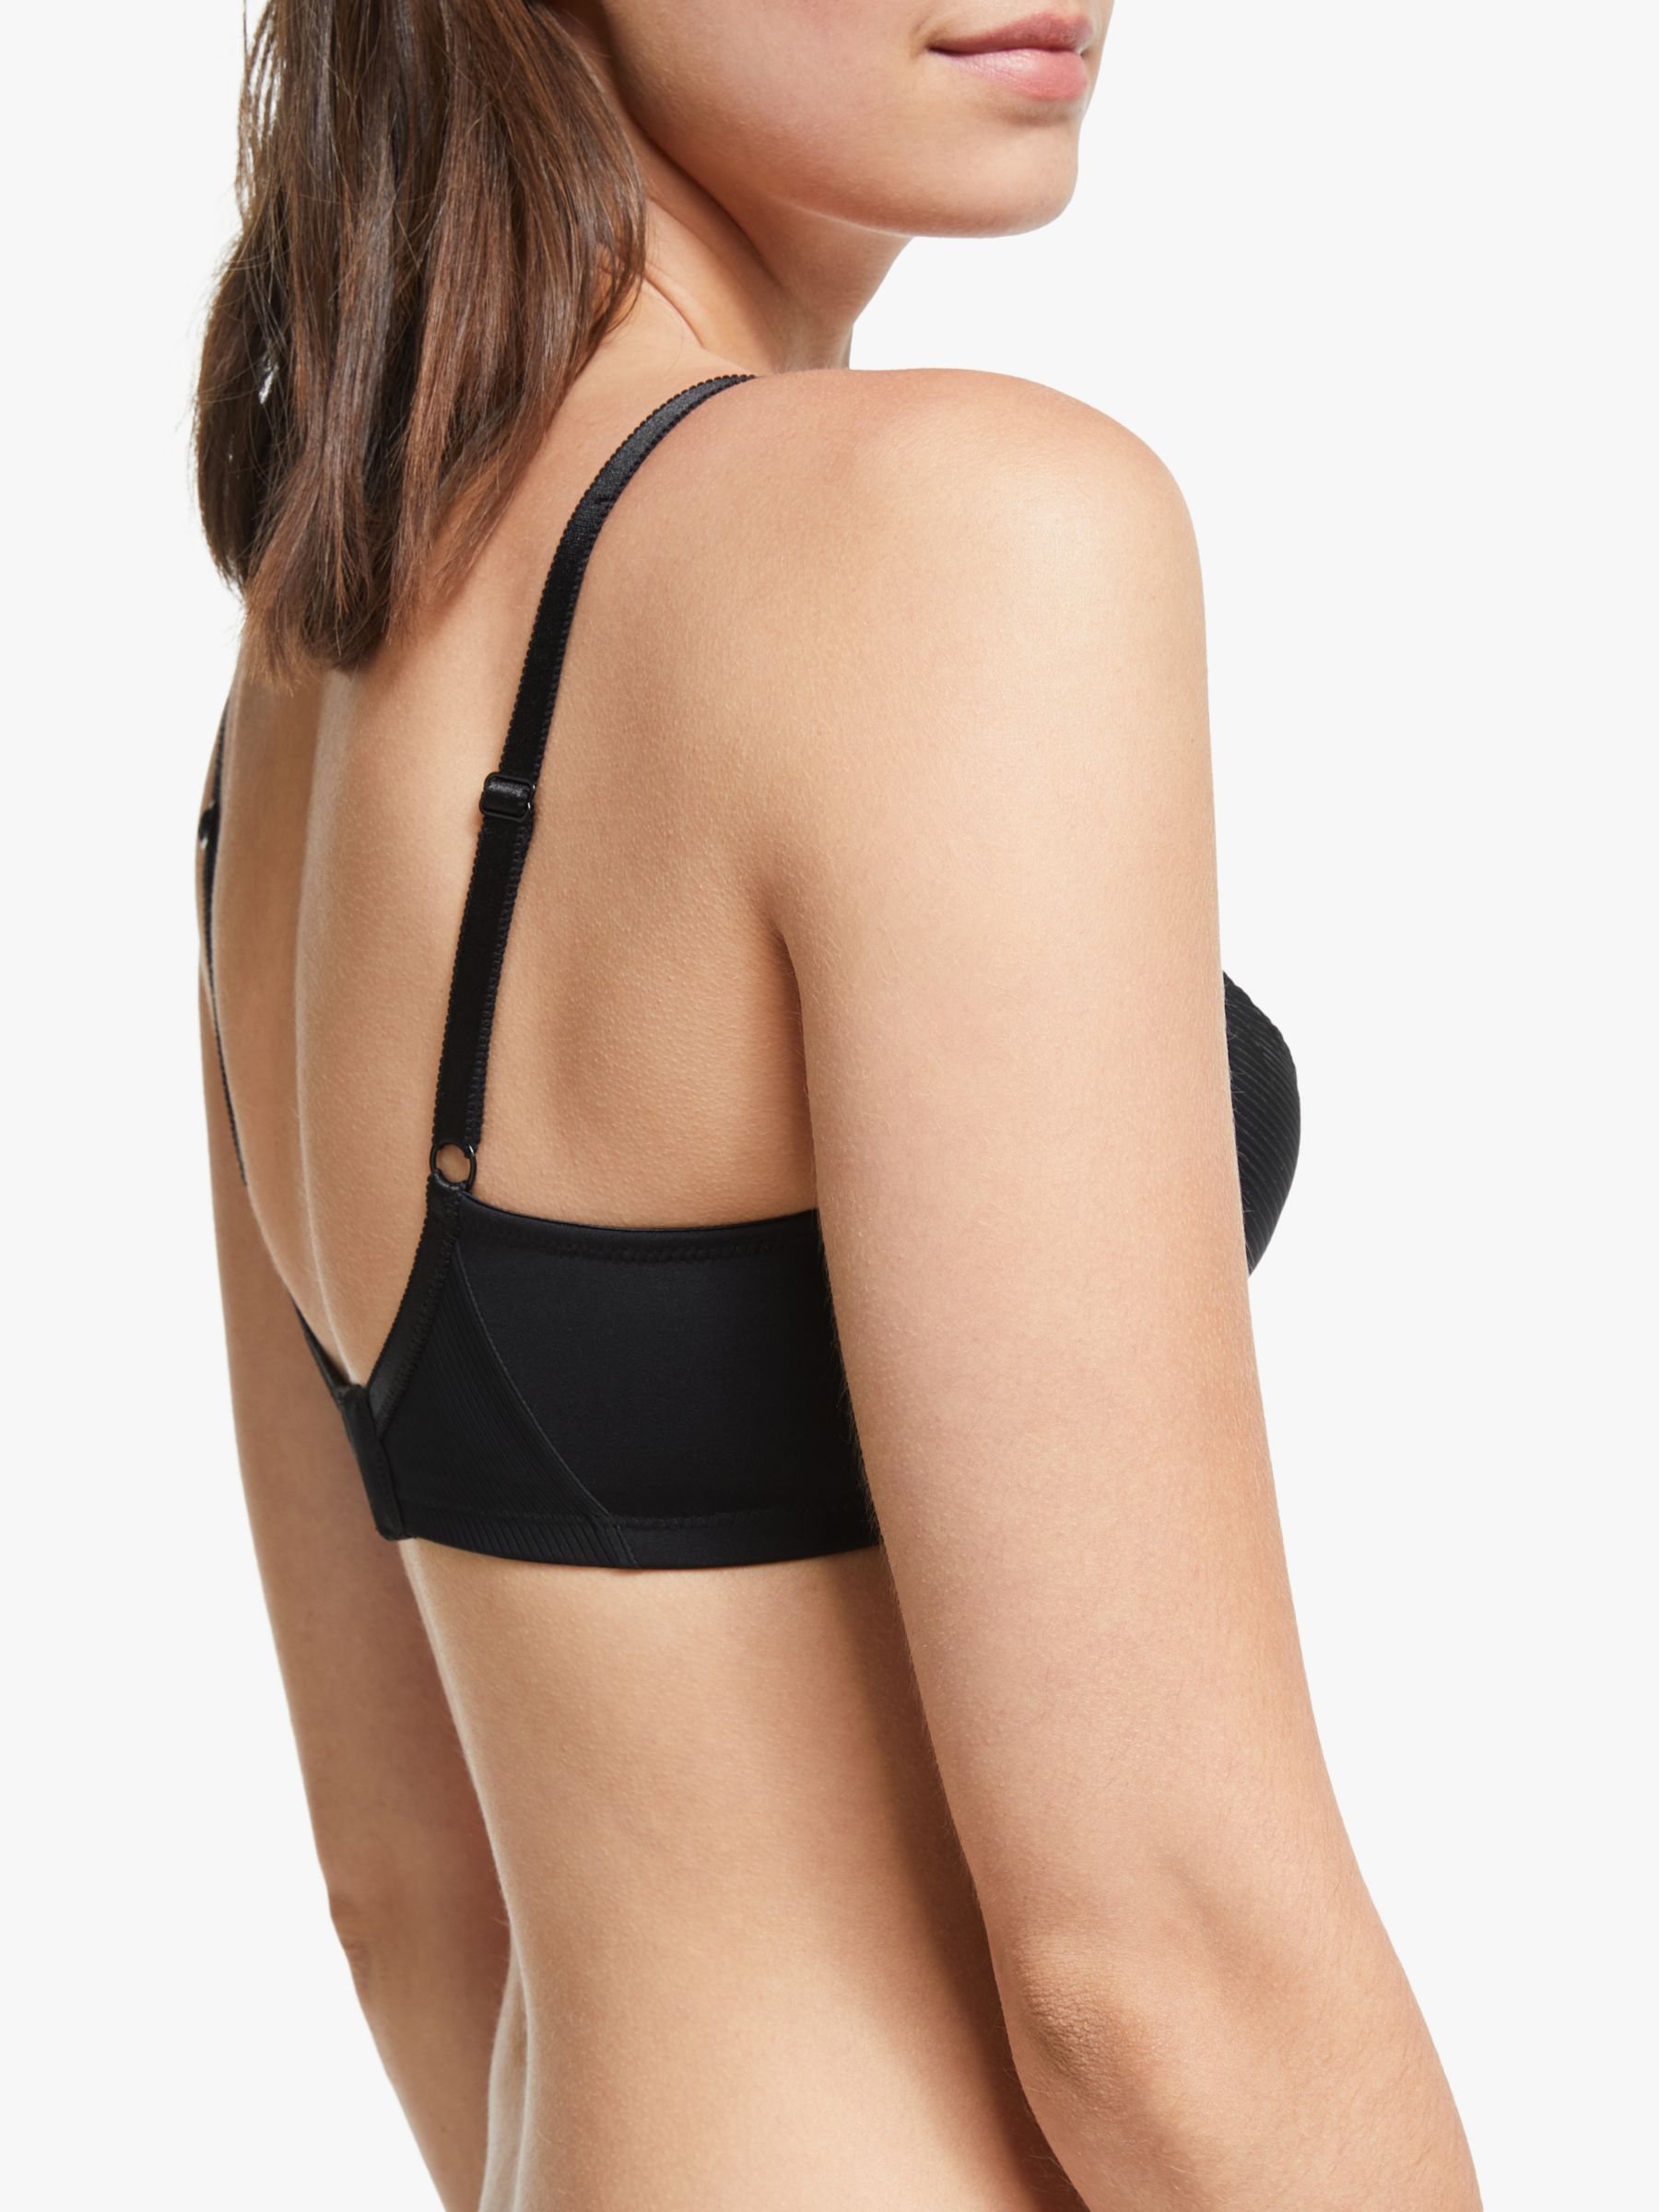 John Lewis Leah Non Wired Non Padded Bra, Compare